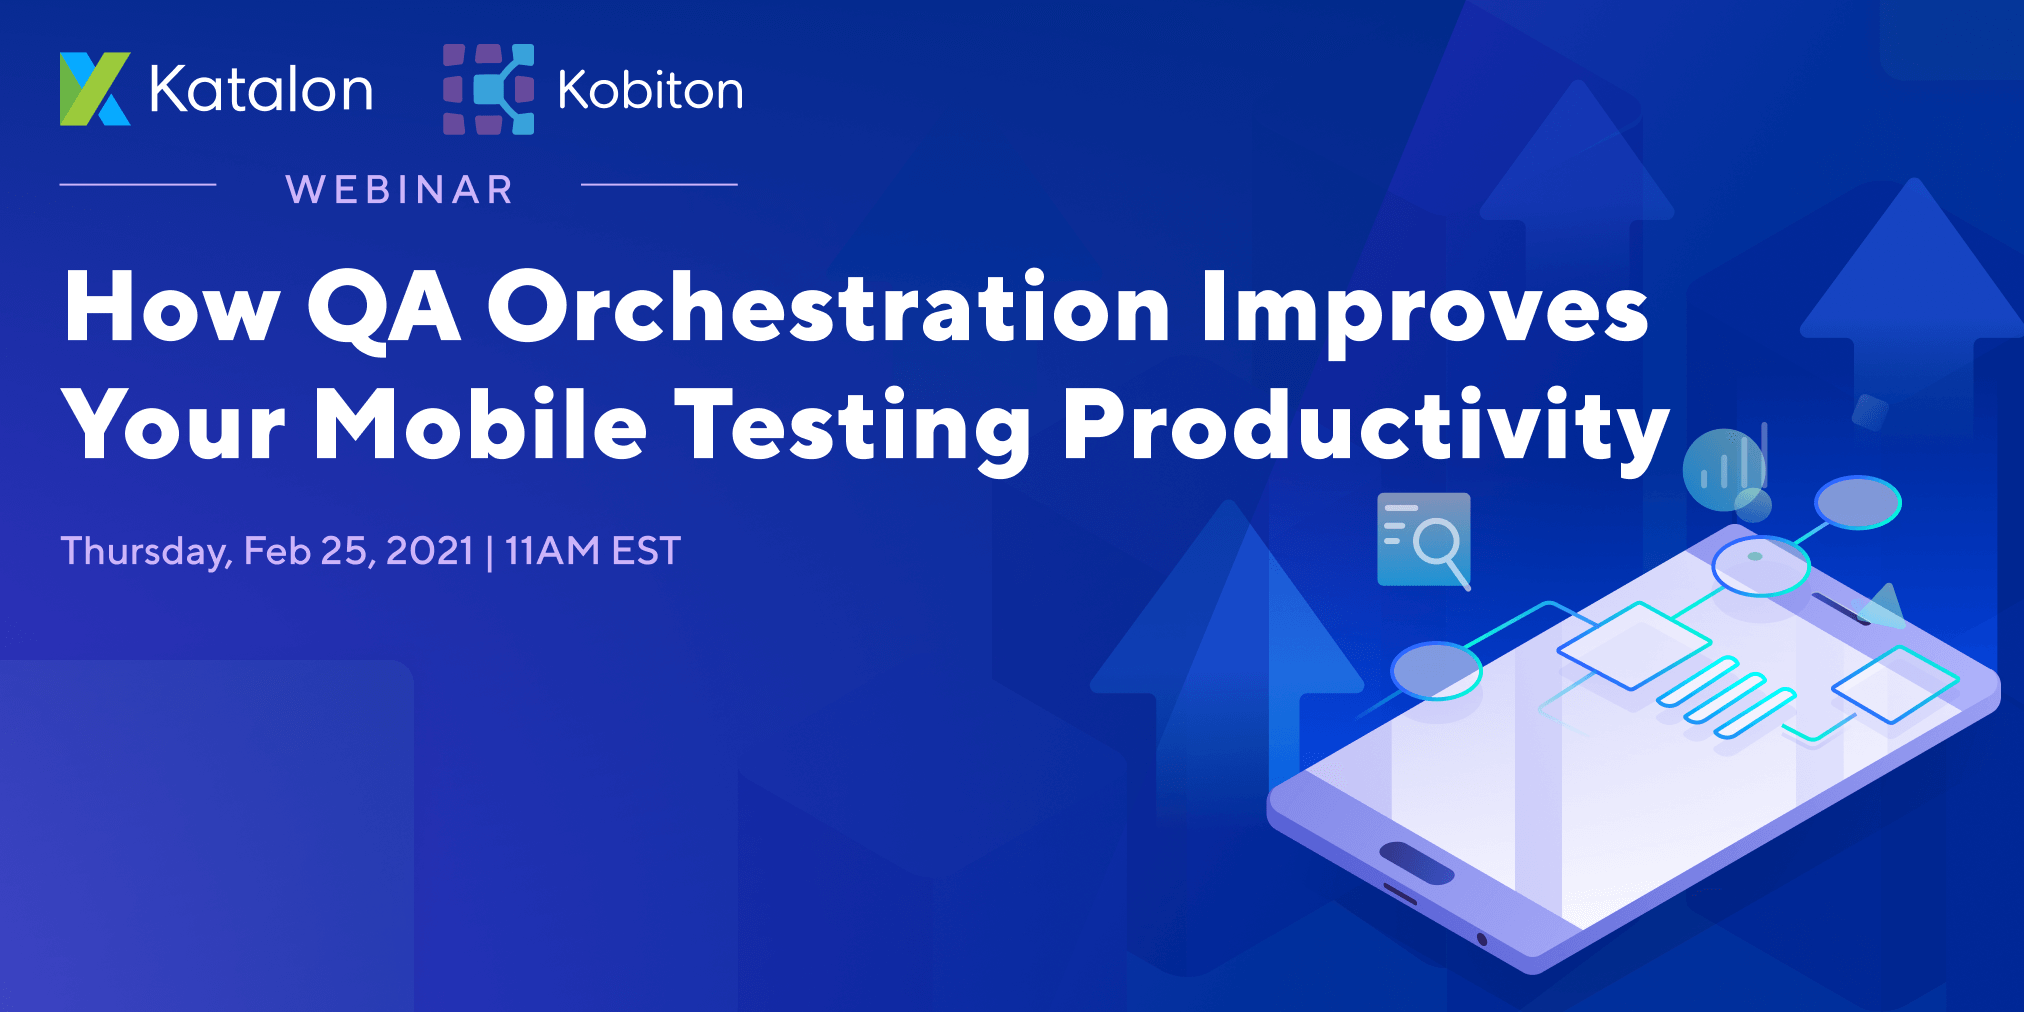 How QA Orchestration Improves Your Mobile Testing Productivity